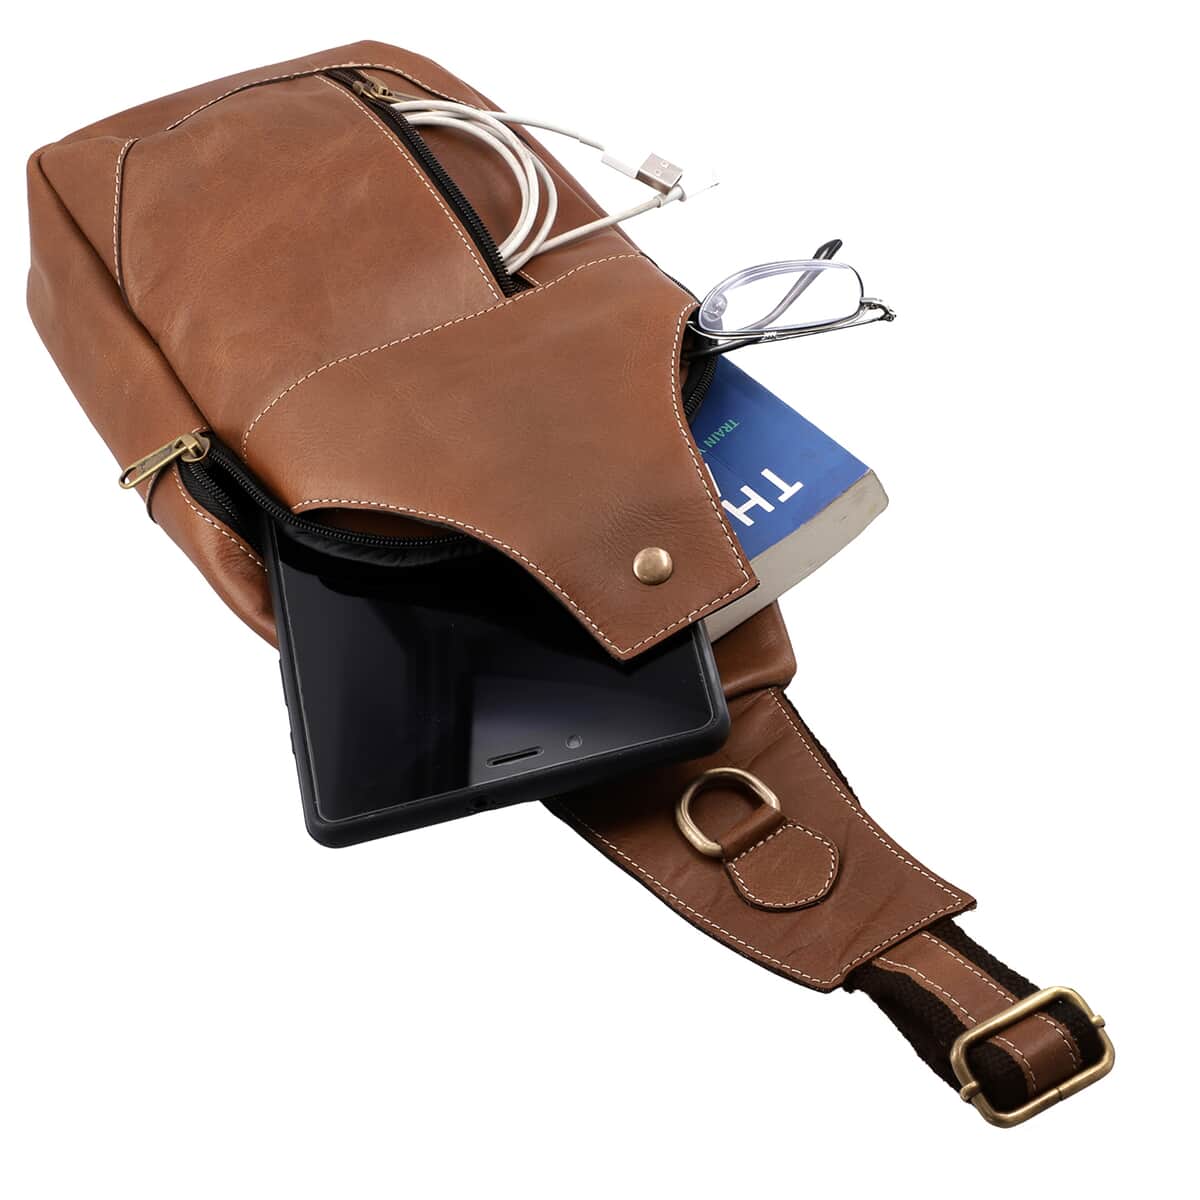 "100% Genuine Leather anti theft backpack bag Color: Beige Size: 5.9L x 3.2W x 8.66H inches " image number 5